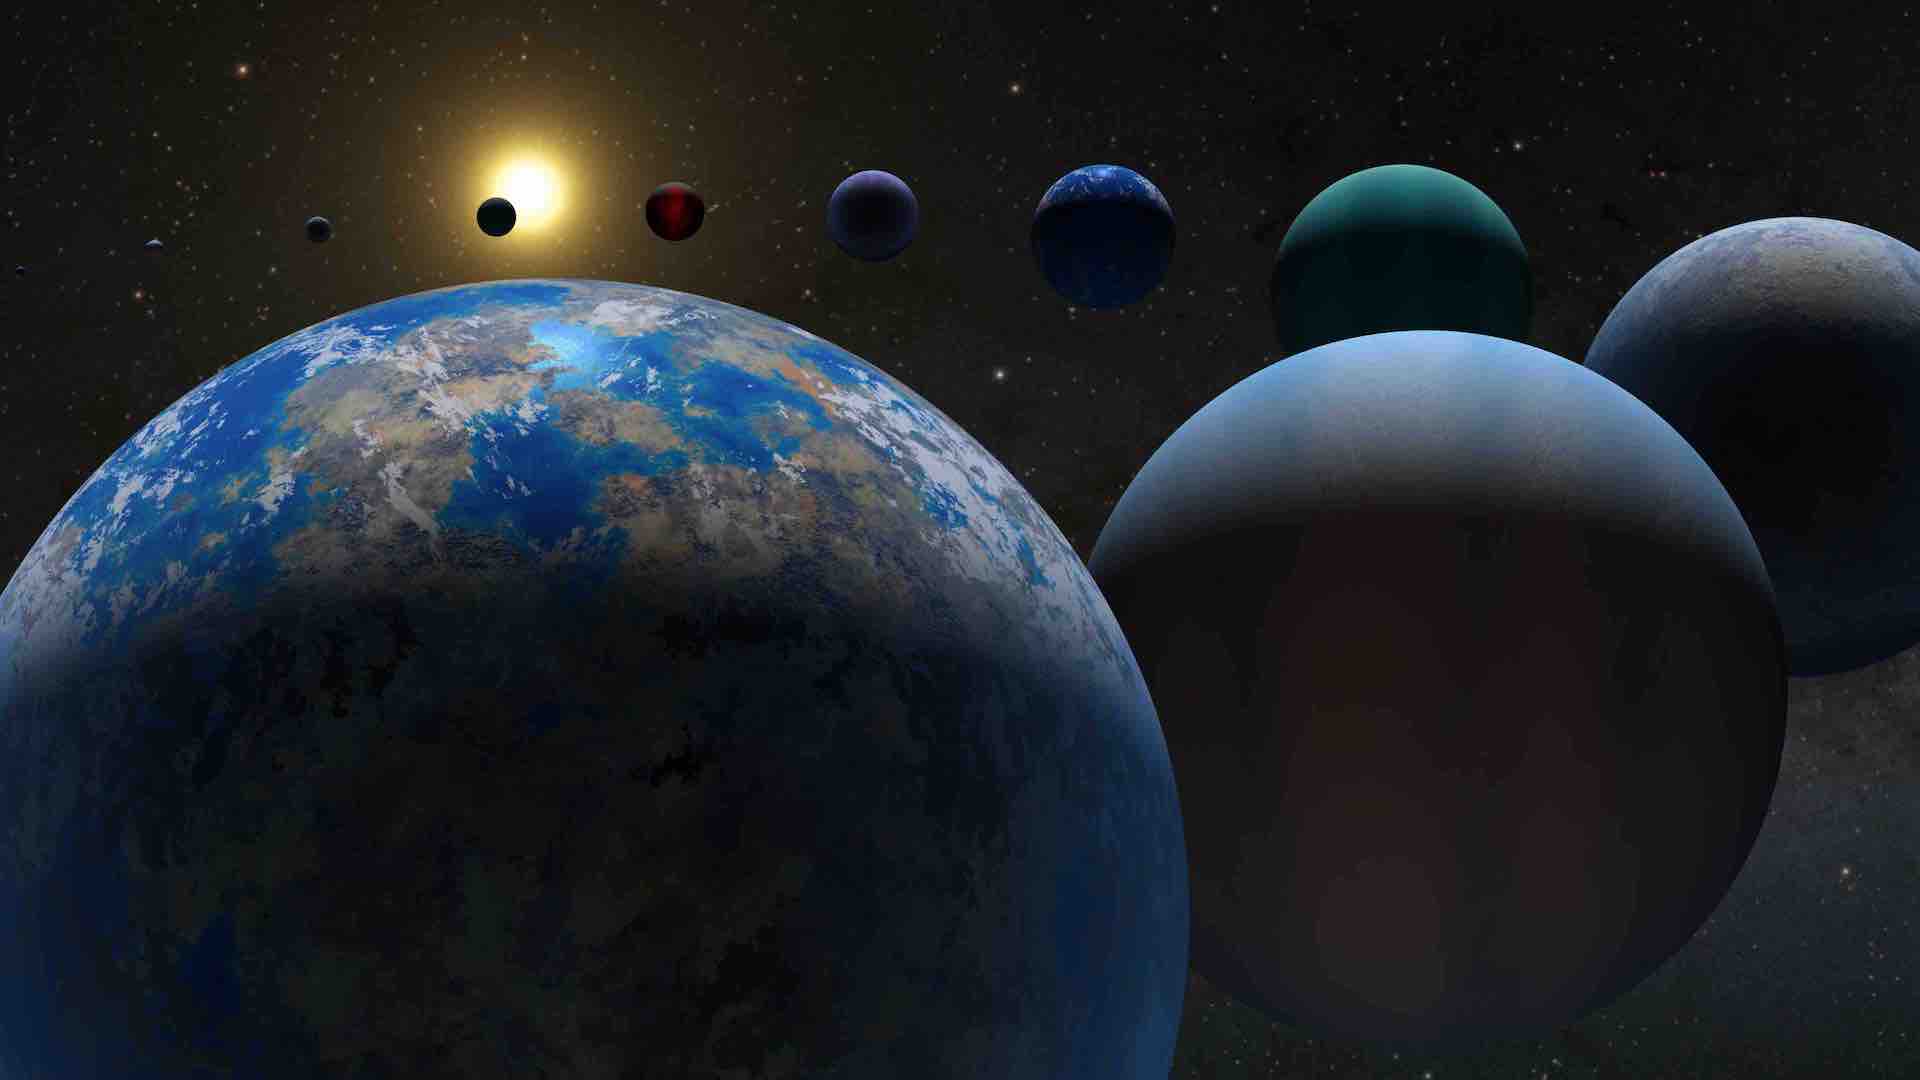 Artist's impression of Earth-like exoplanets